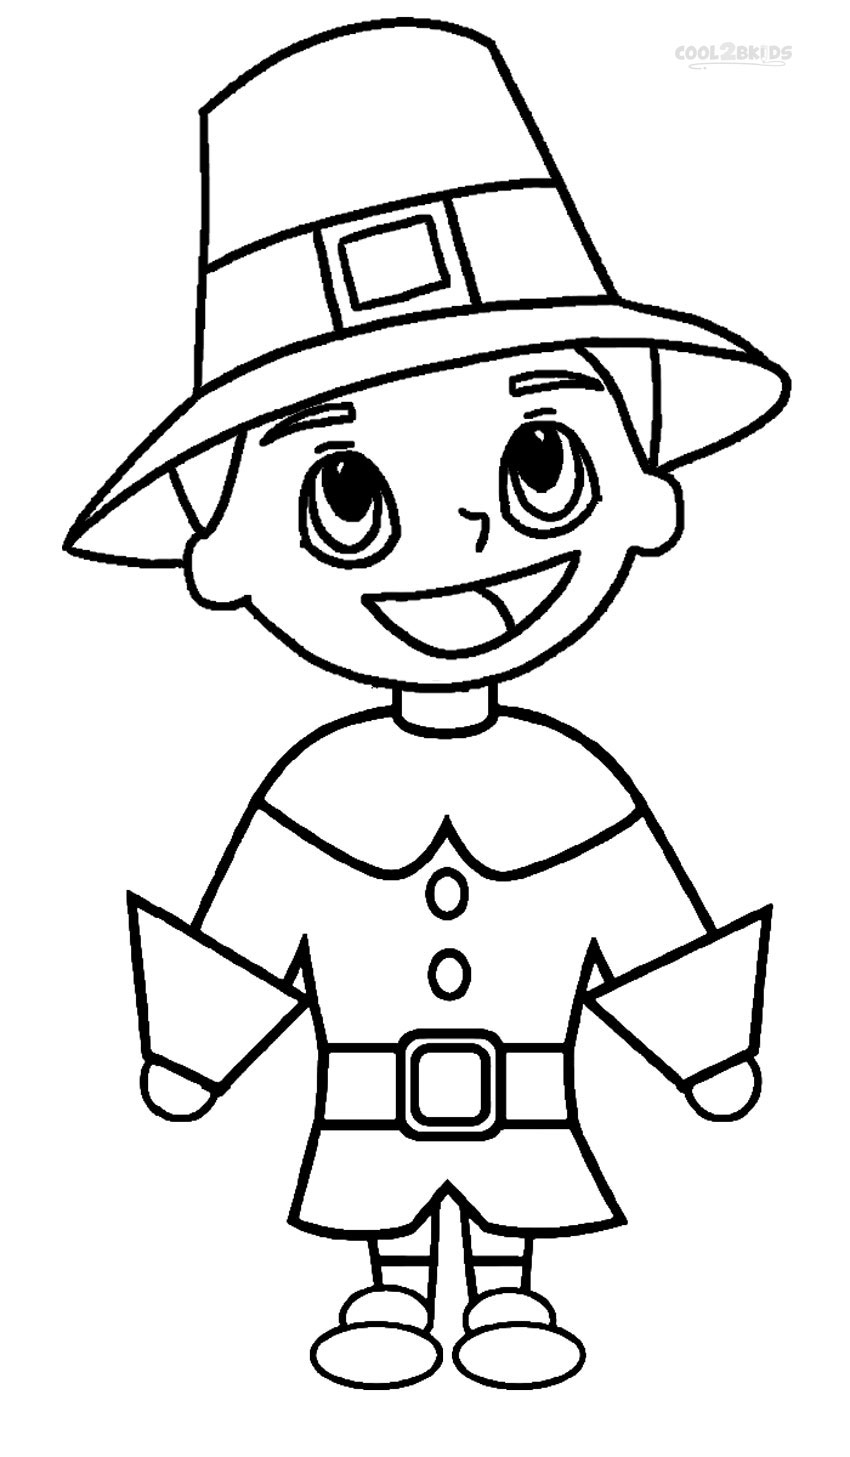 Pilgrim Indian Coloring Pages Printable Pilgrims Coloring Pages For Kids Cool2bkids